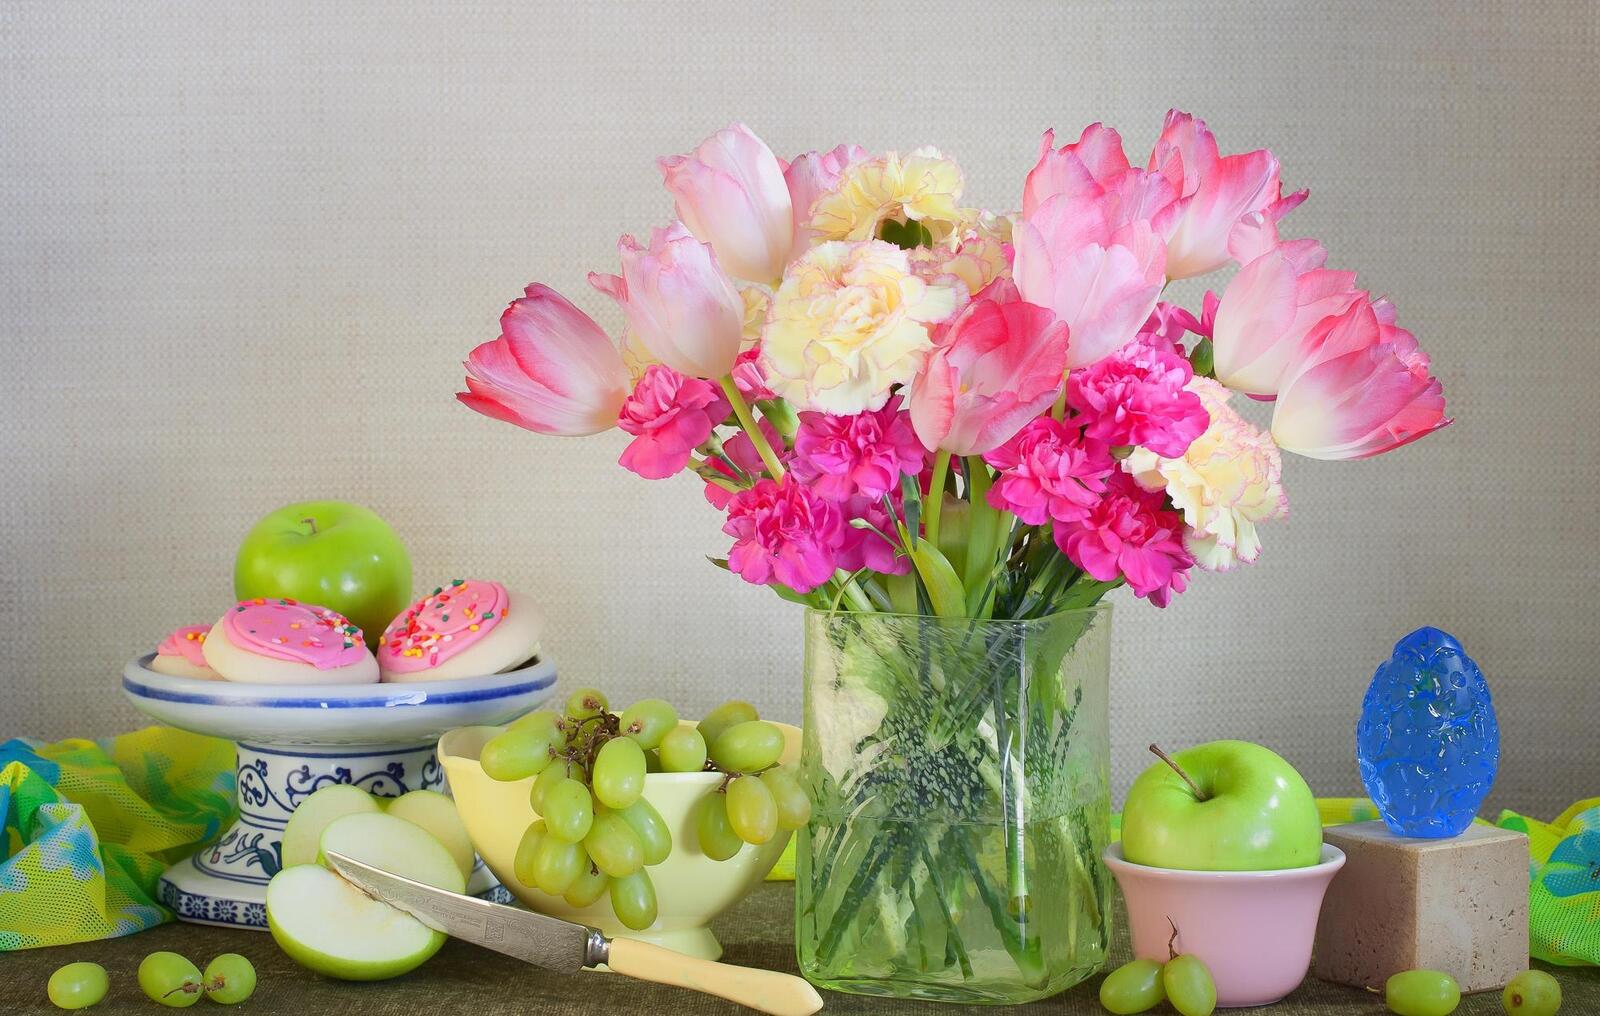 Wallpapers carnations tulips grapes on the desktop